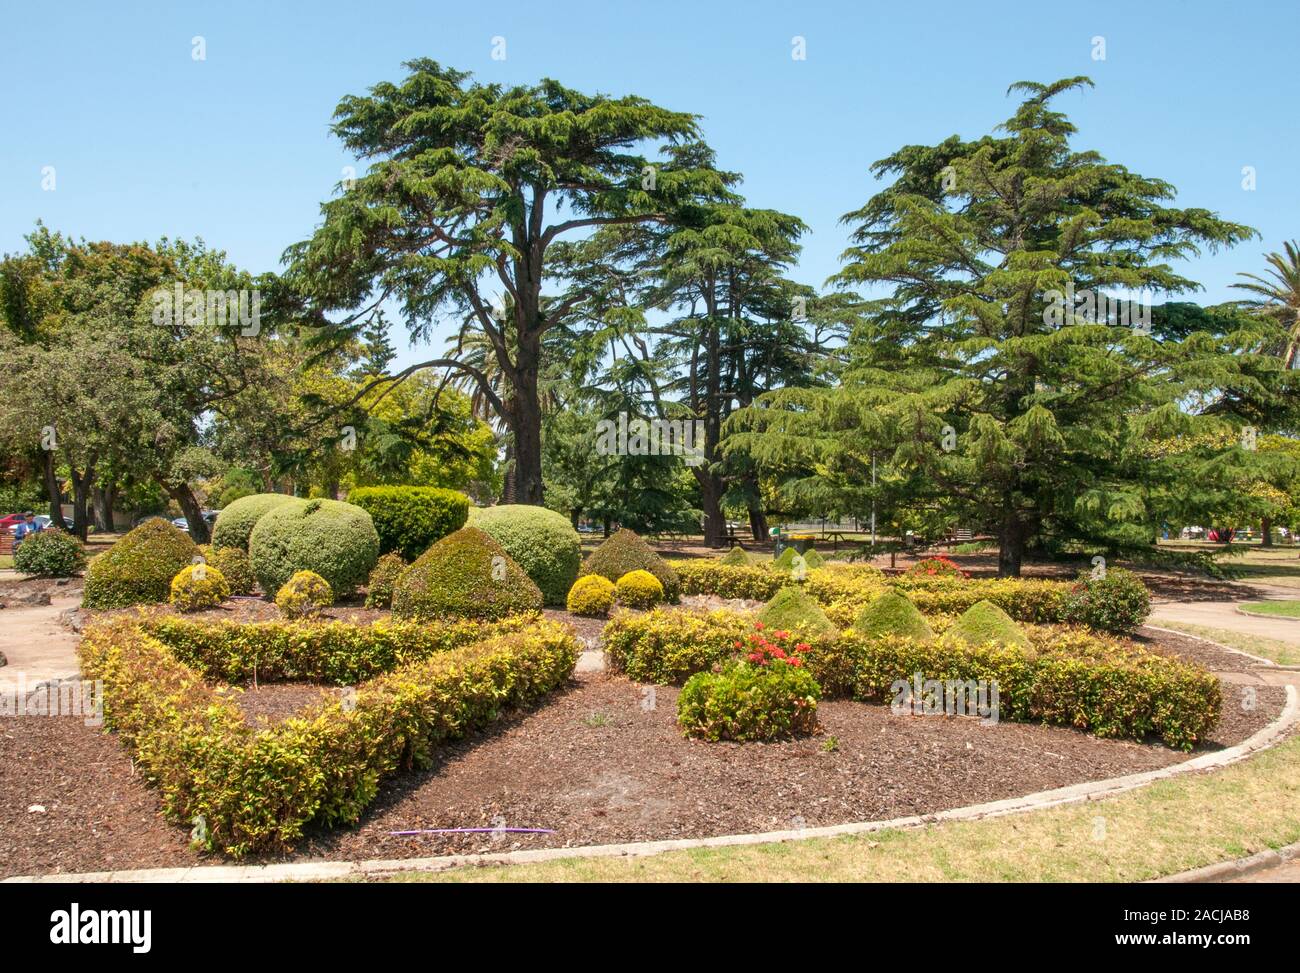 Laid out in 1909, Elsternwick's Hopetoun Gardens are home to several significant trees, including oak, laurel, wild plum, magnolia and chestnut. Stock Photo